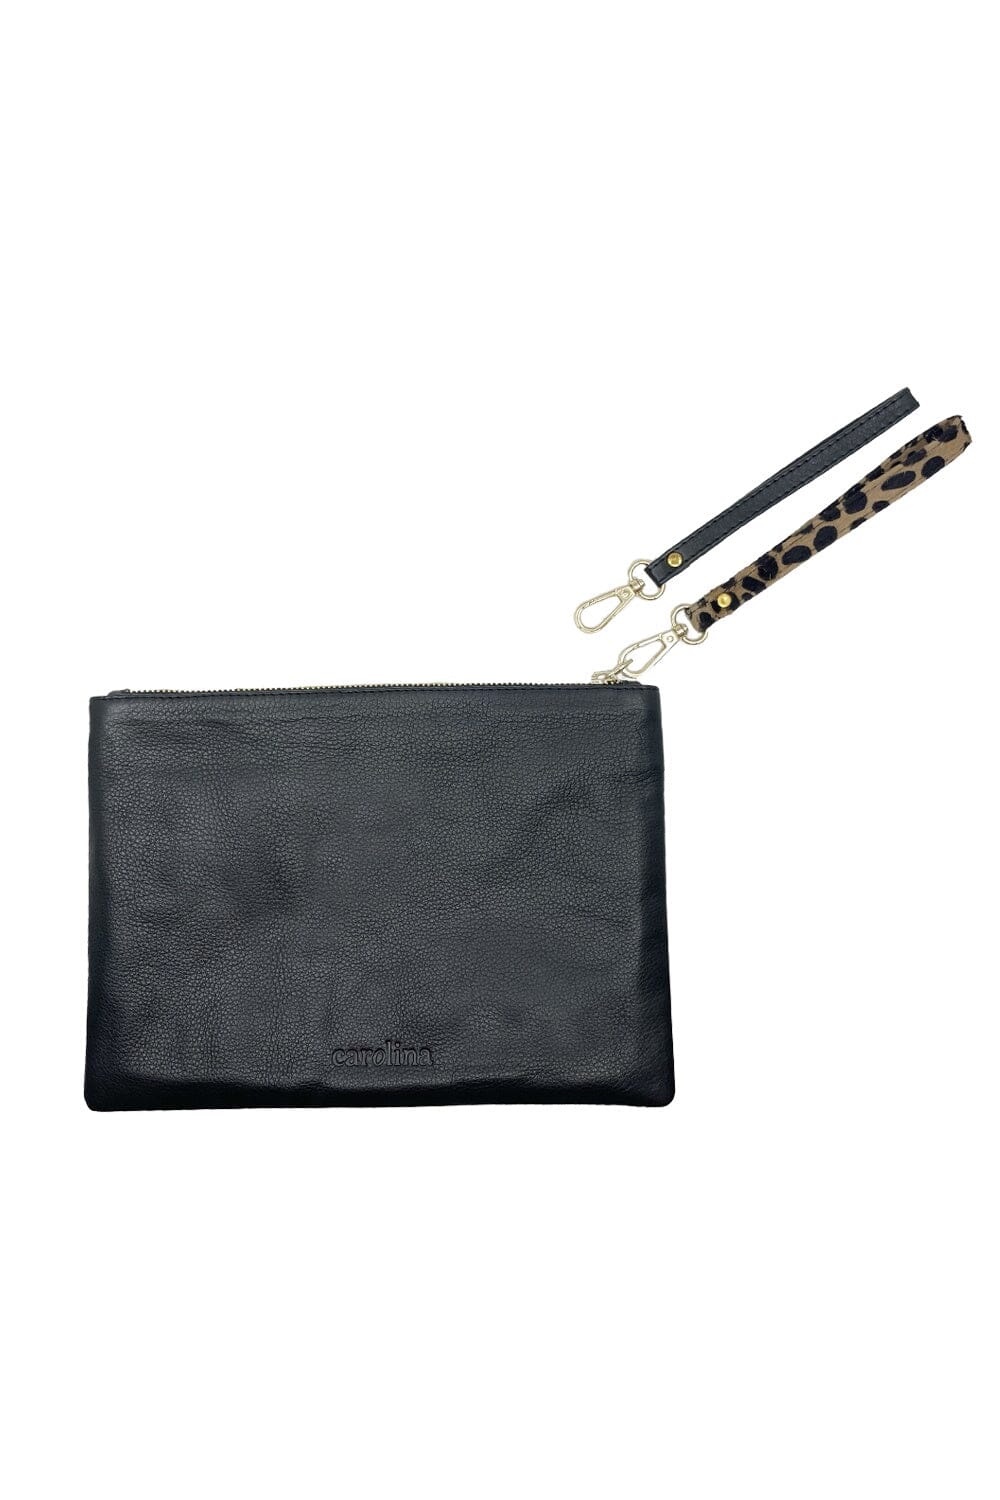 Cassie Clutch Black Soft Leather Leather